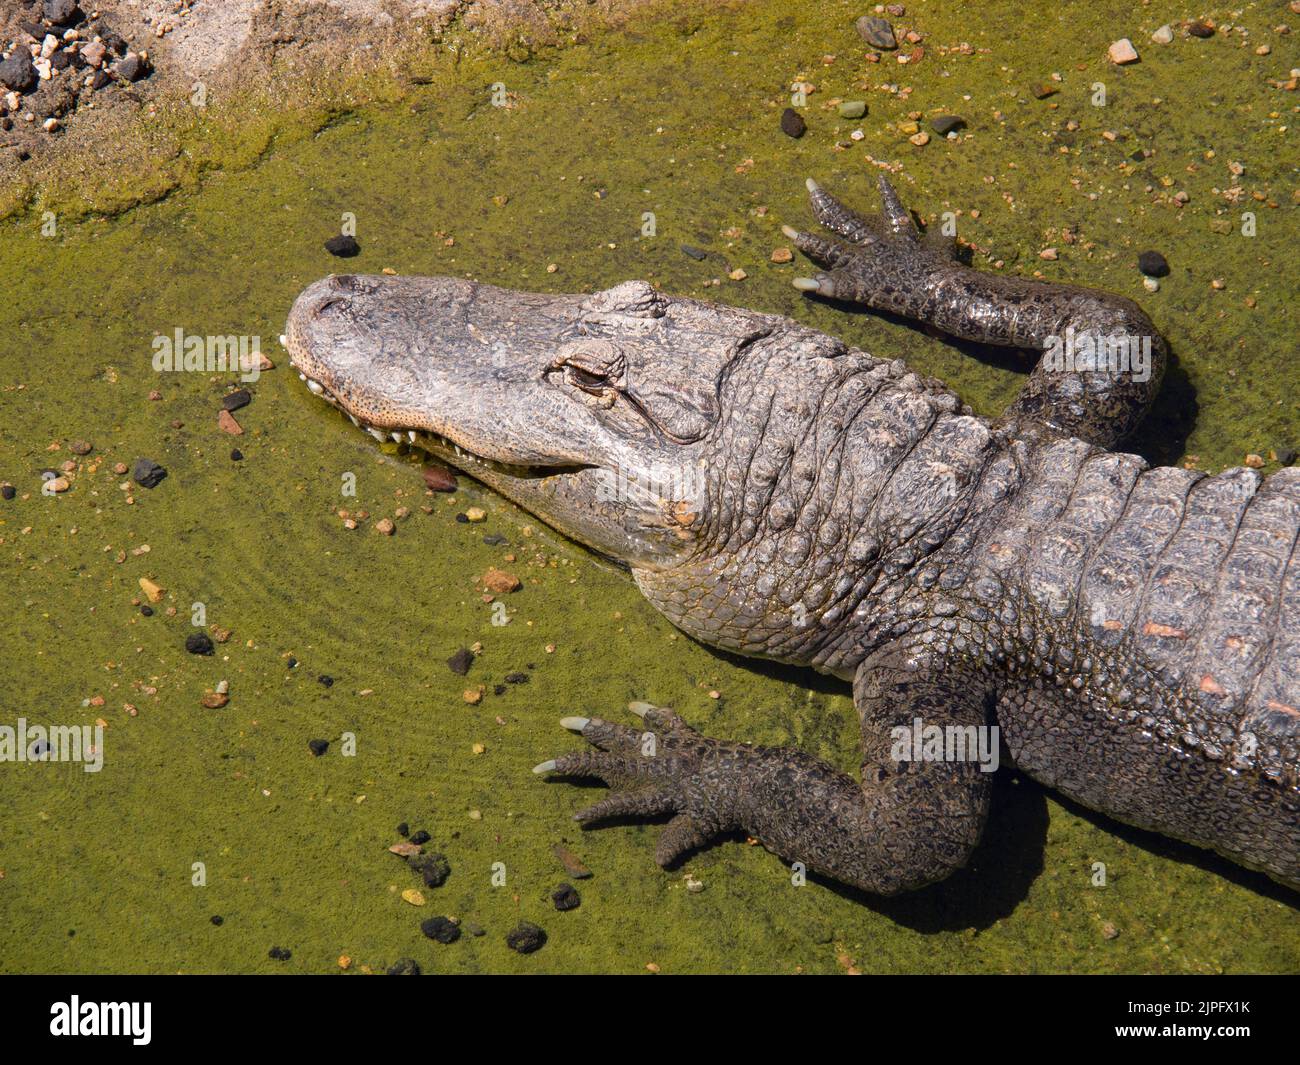 Mississippi alligator in a zoo under the sunlight Stock Photo